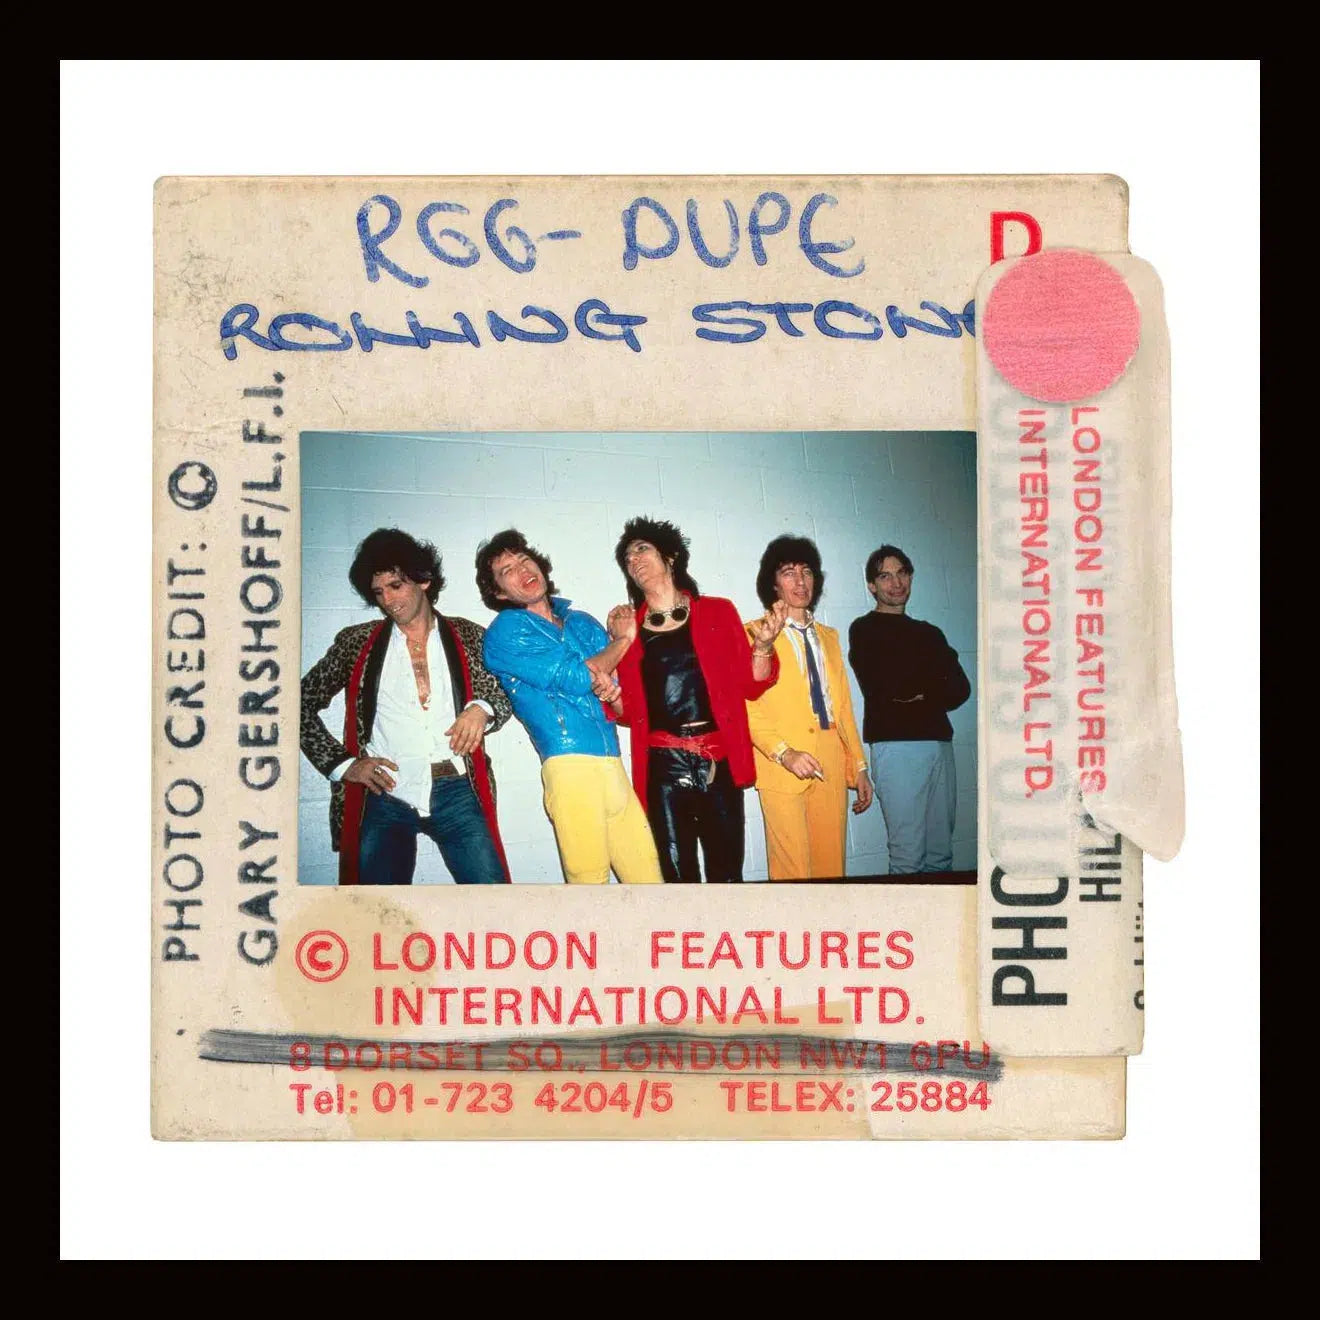 The Rolling Stones - Slide 3, from The Wild Ones collection-PurePhoto